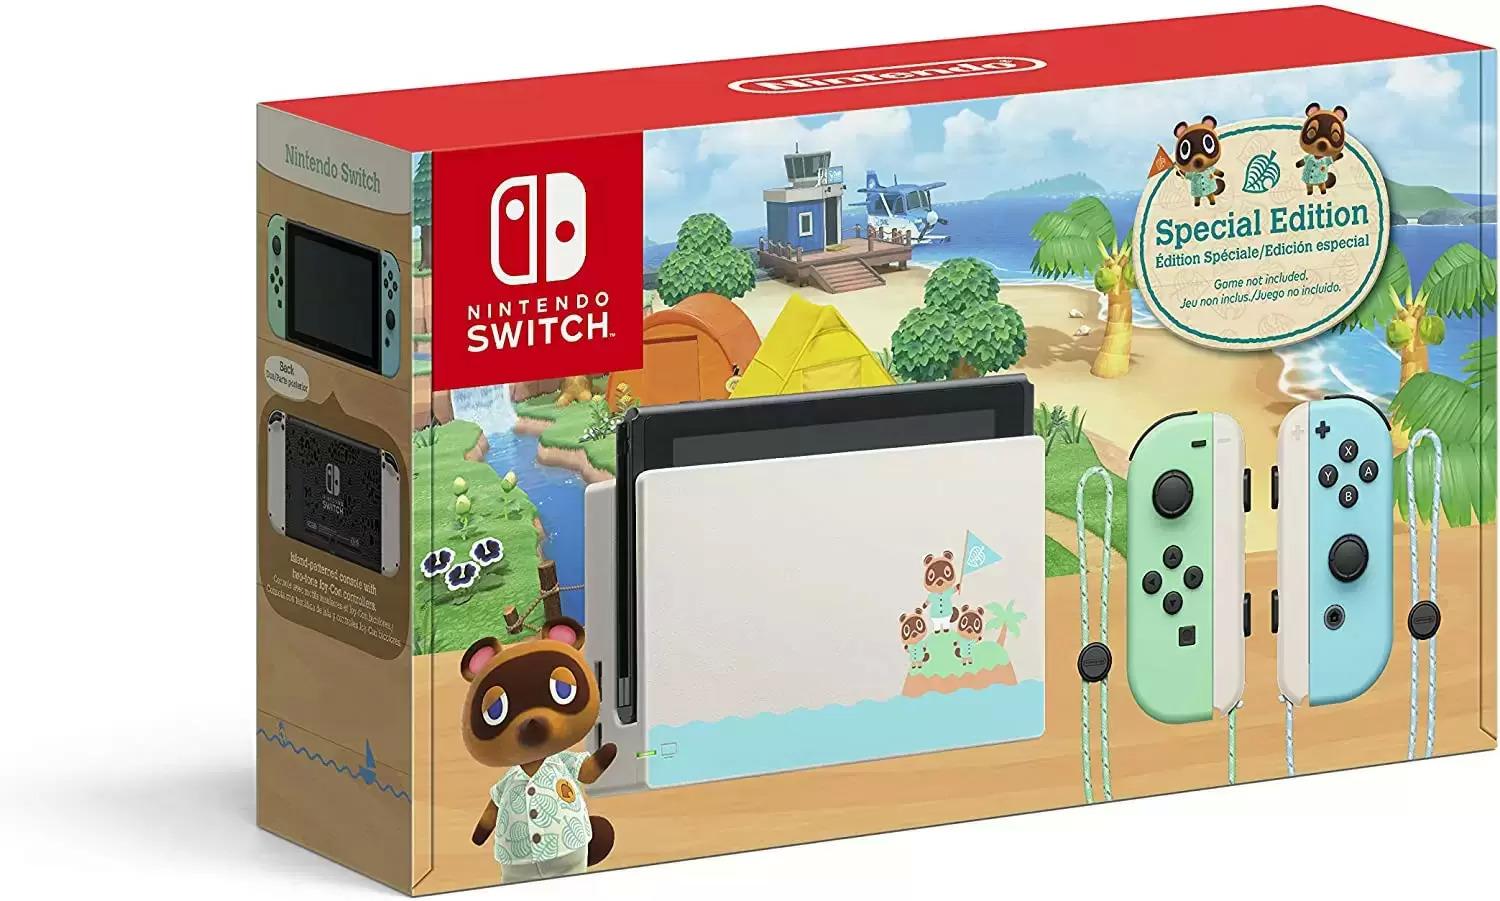 Nintendo Switch Animal Crossing New Horizons Edition + $35 GC for $299.99 Shipped